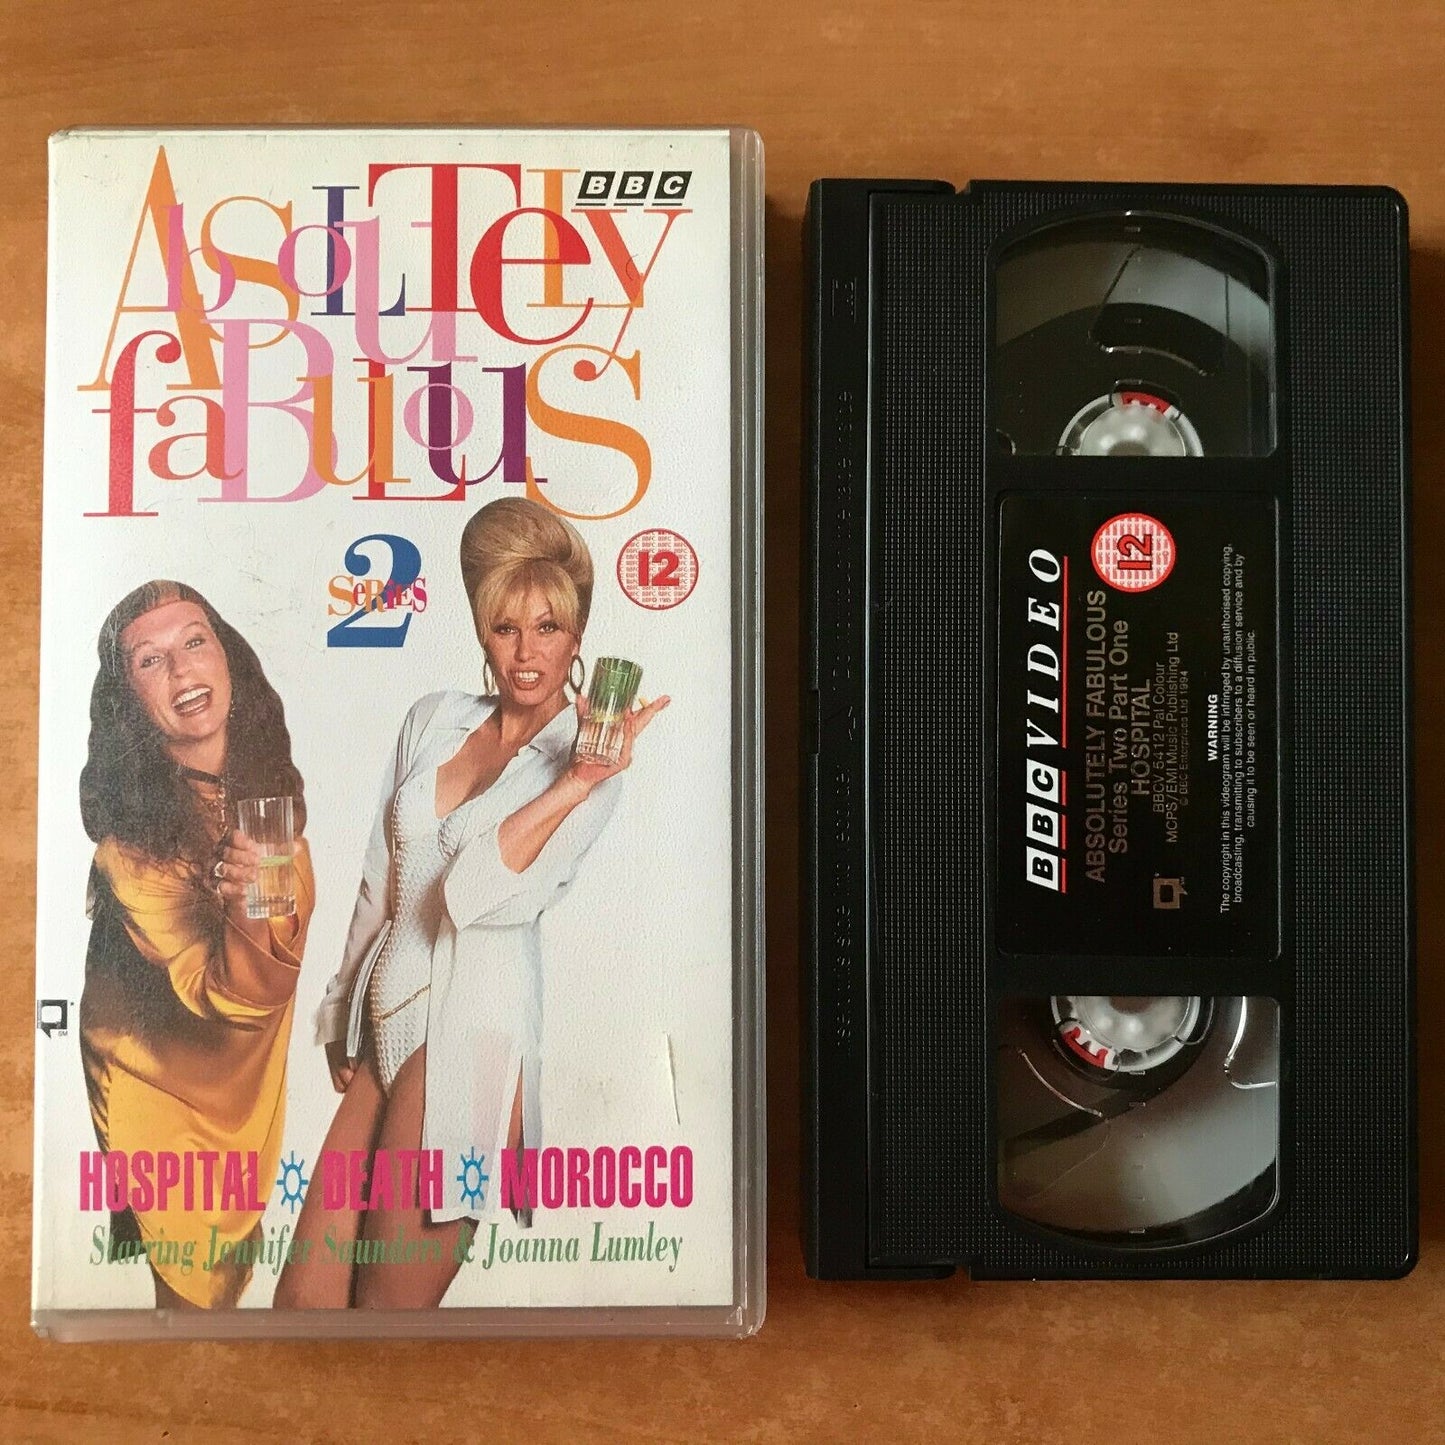 Absolutely Fabulous (Series 2): "Morocco" [BBC] Comedy - Jennifer Saunders - VHS-